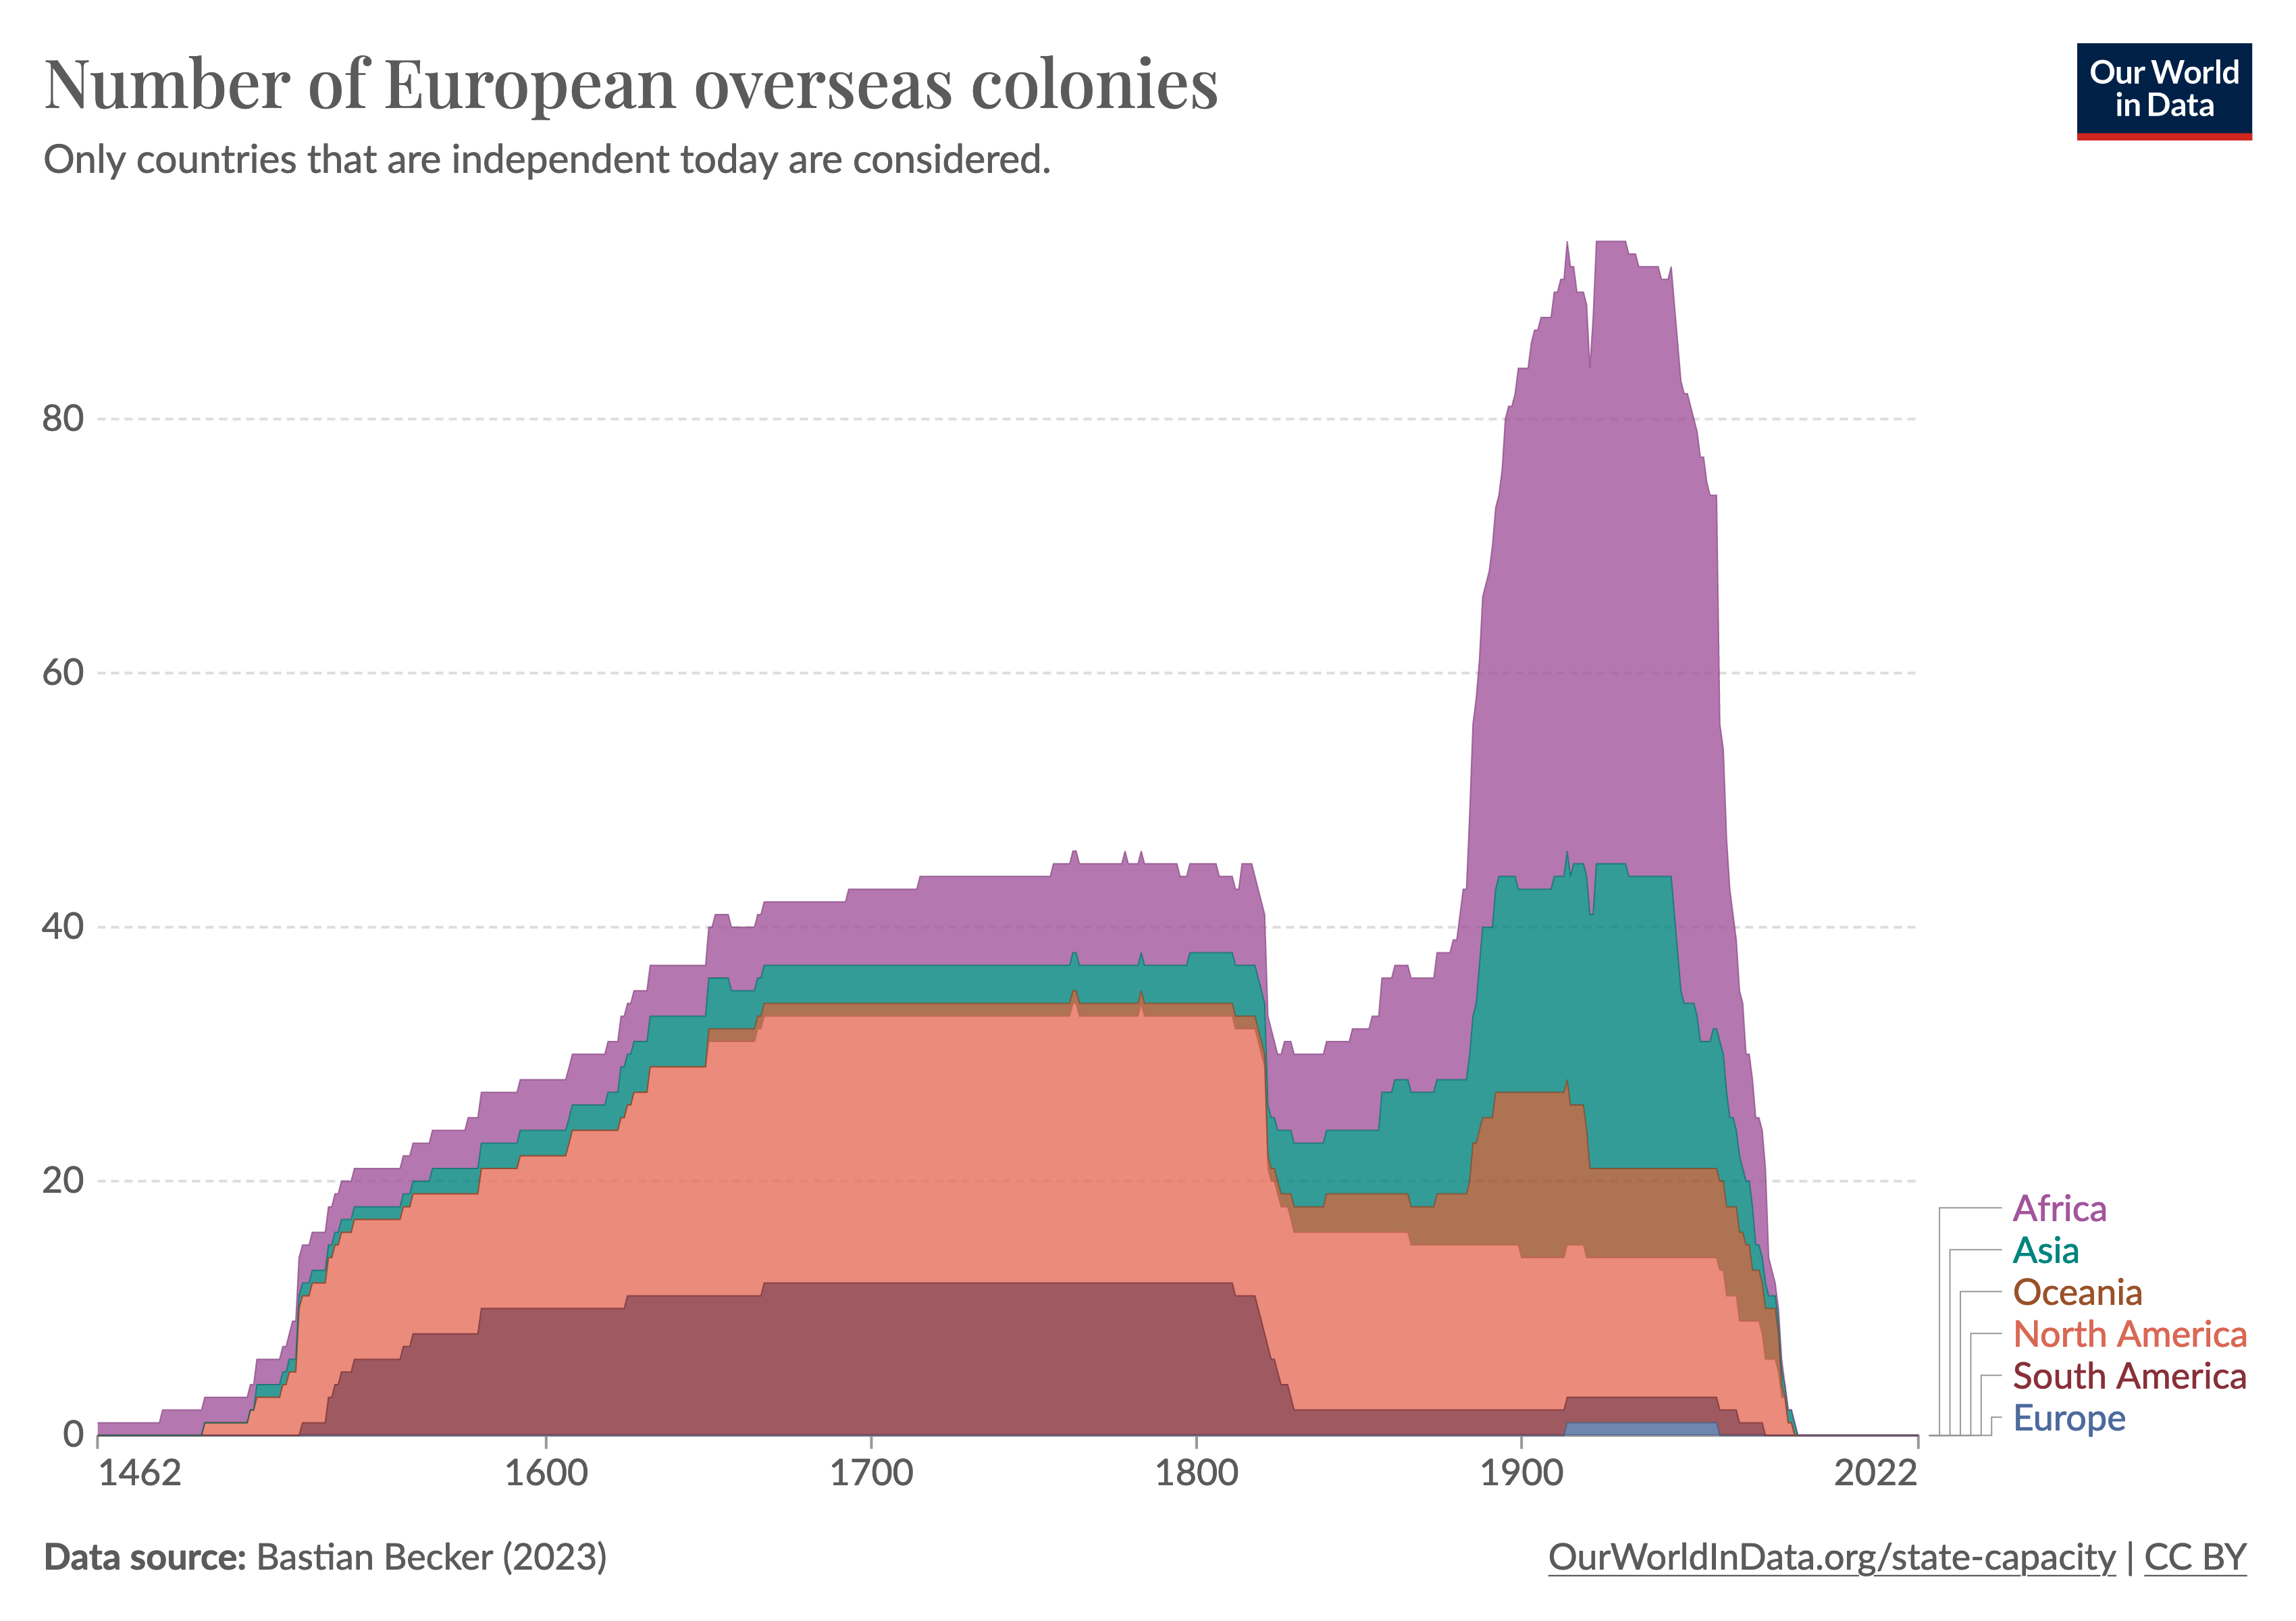 Stacked area chart of the number of European overseas colonies by region. The first wave last from the 15th century to the early 19th century and primarily affects the Americas. The second wave starts in the late 19th century, is concentrated in Africa and Asia, and ends in the mid-20th century.